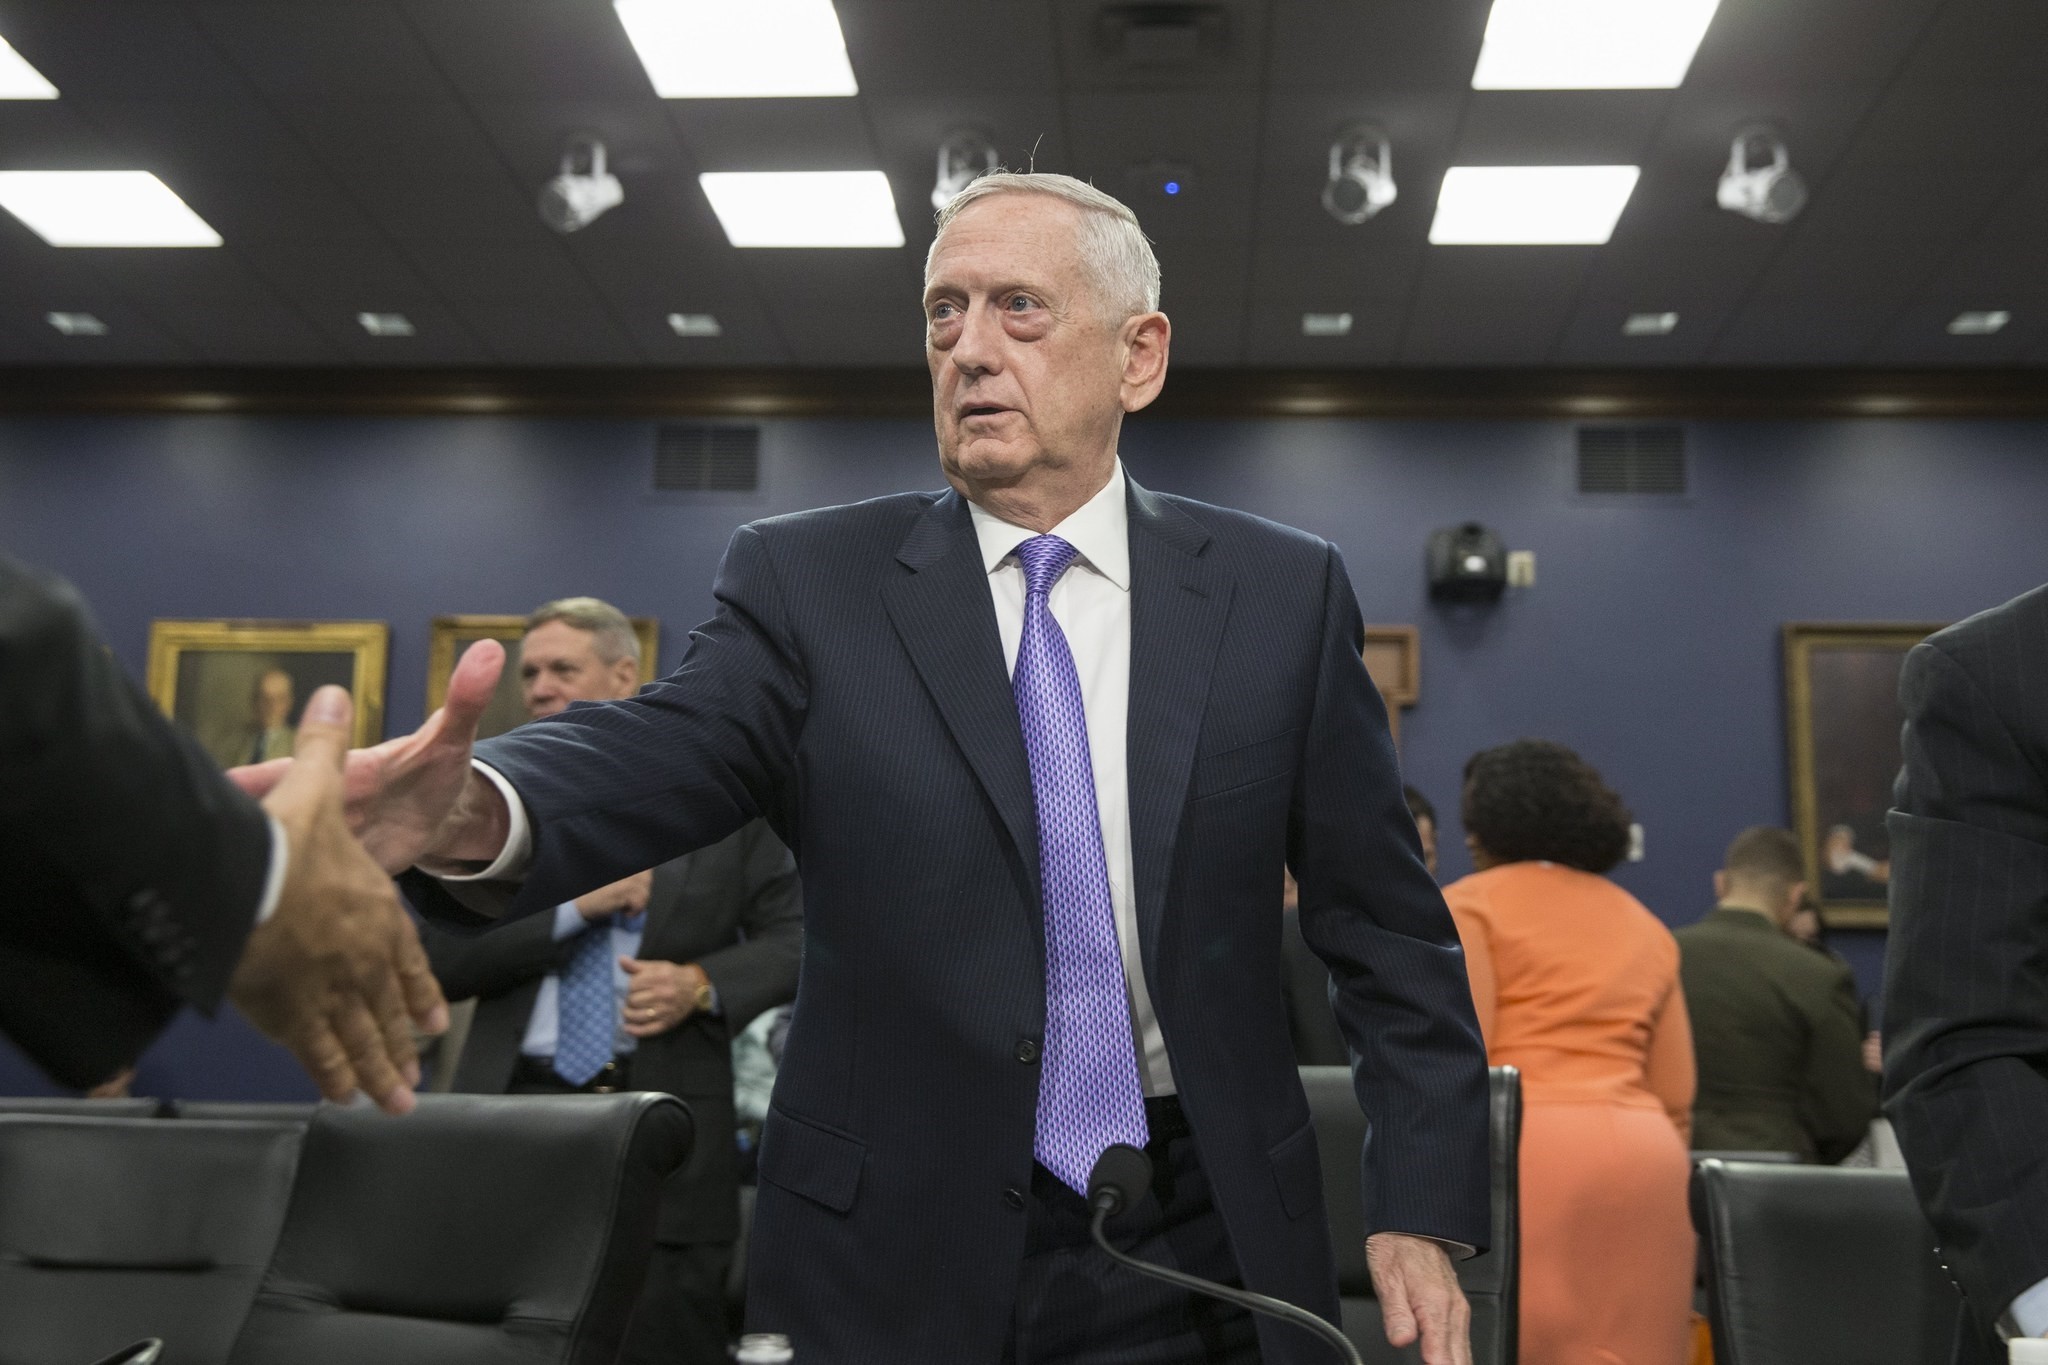 US Secretary of Defense James Mattis greets members of Congress after testifying before a House Appropriations subcommittee hearing on the Defense Department budget, on Capitol Hill in Washington, DC, June 15. (EPA Photo) 